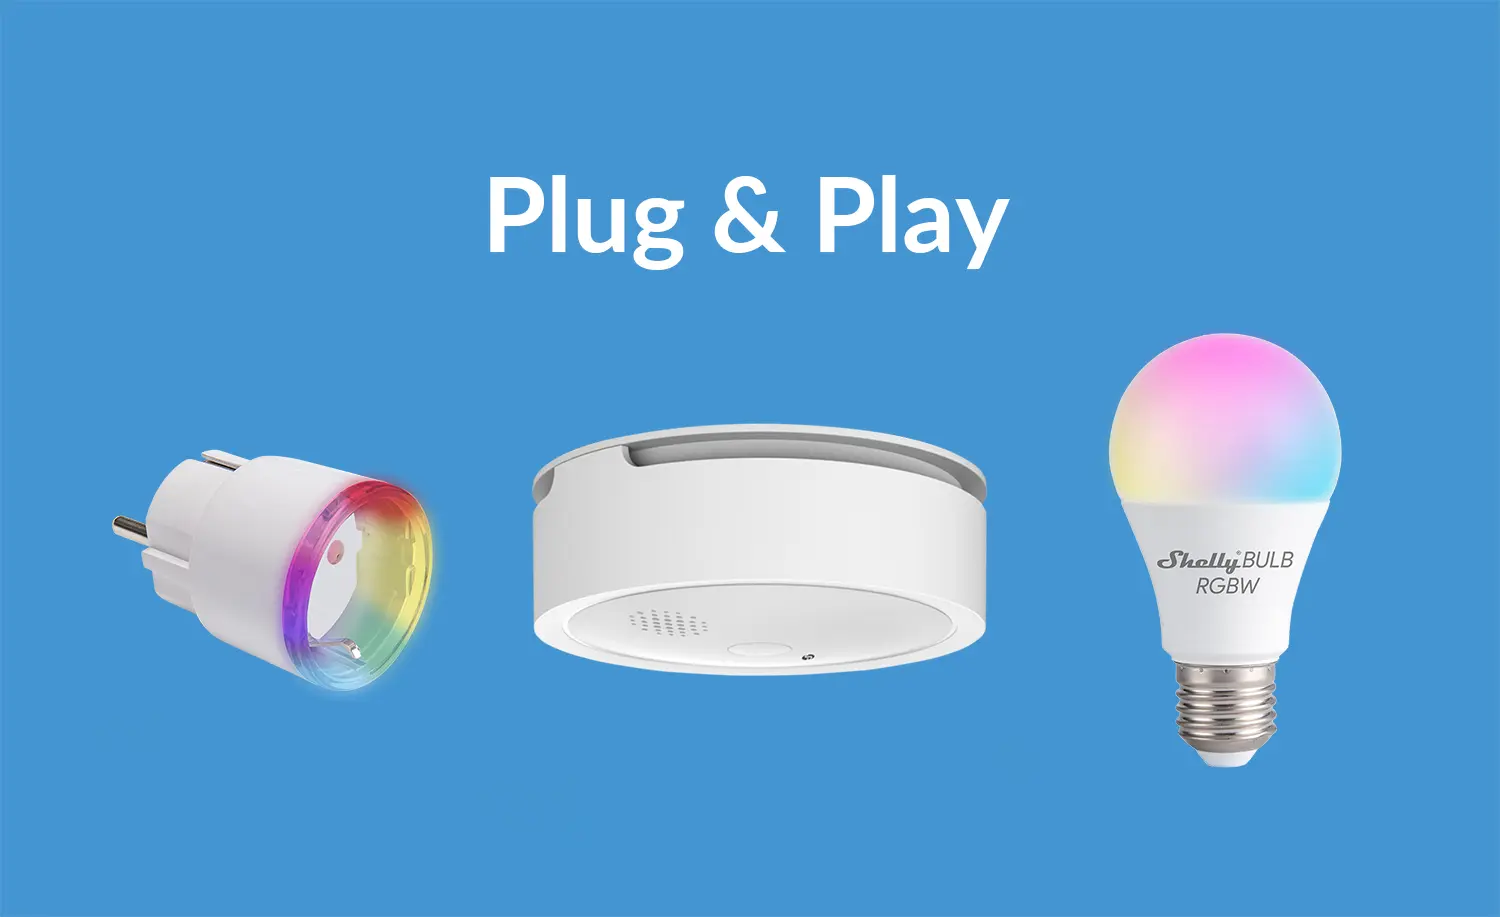 Plug & Play series from Shelly